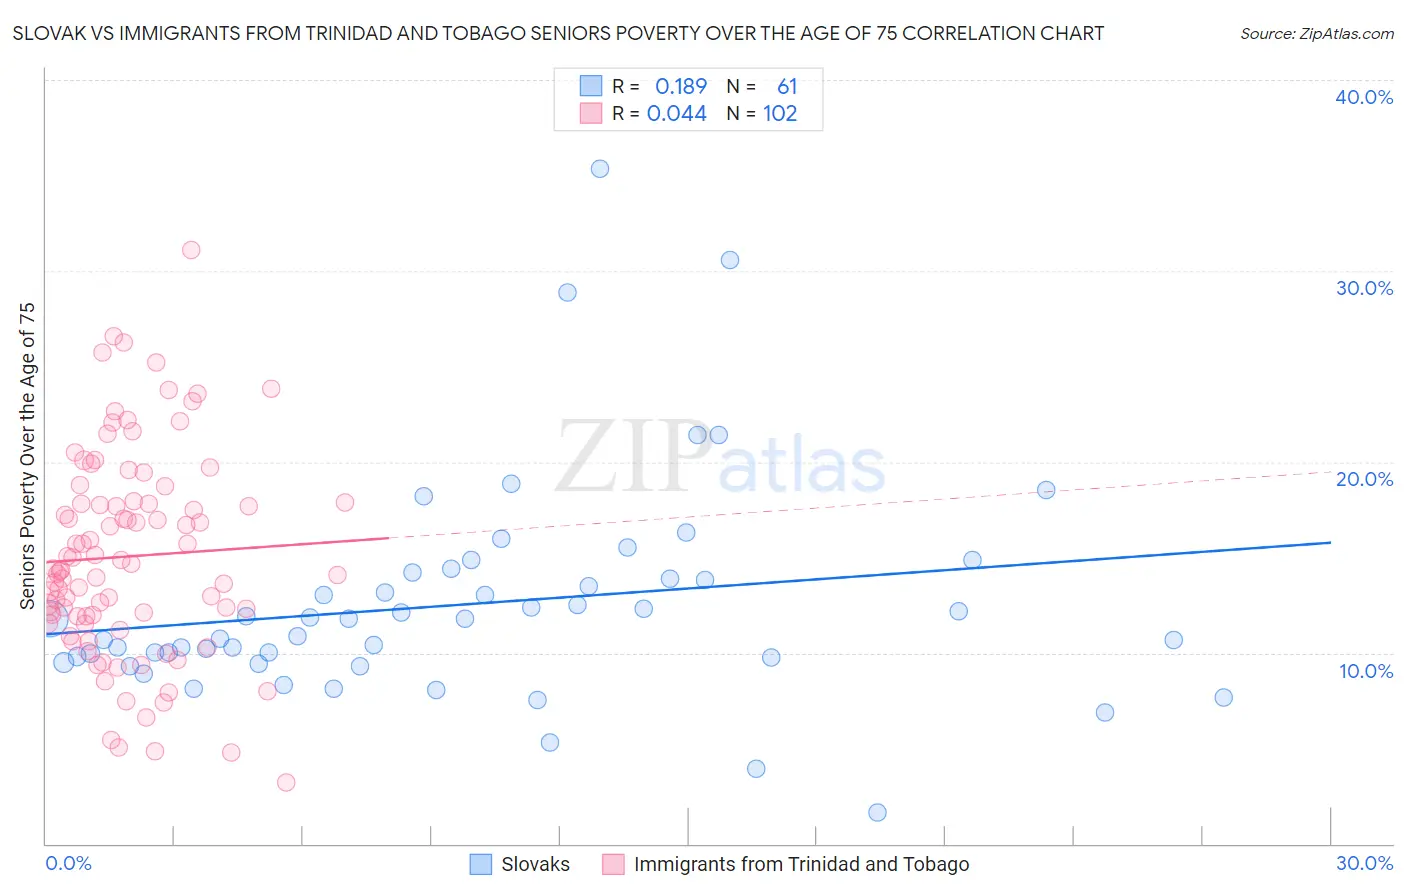 Slovak vs Immigrants from Trinidad and Tobago Seniors Poverty Over the Age of 75